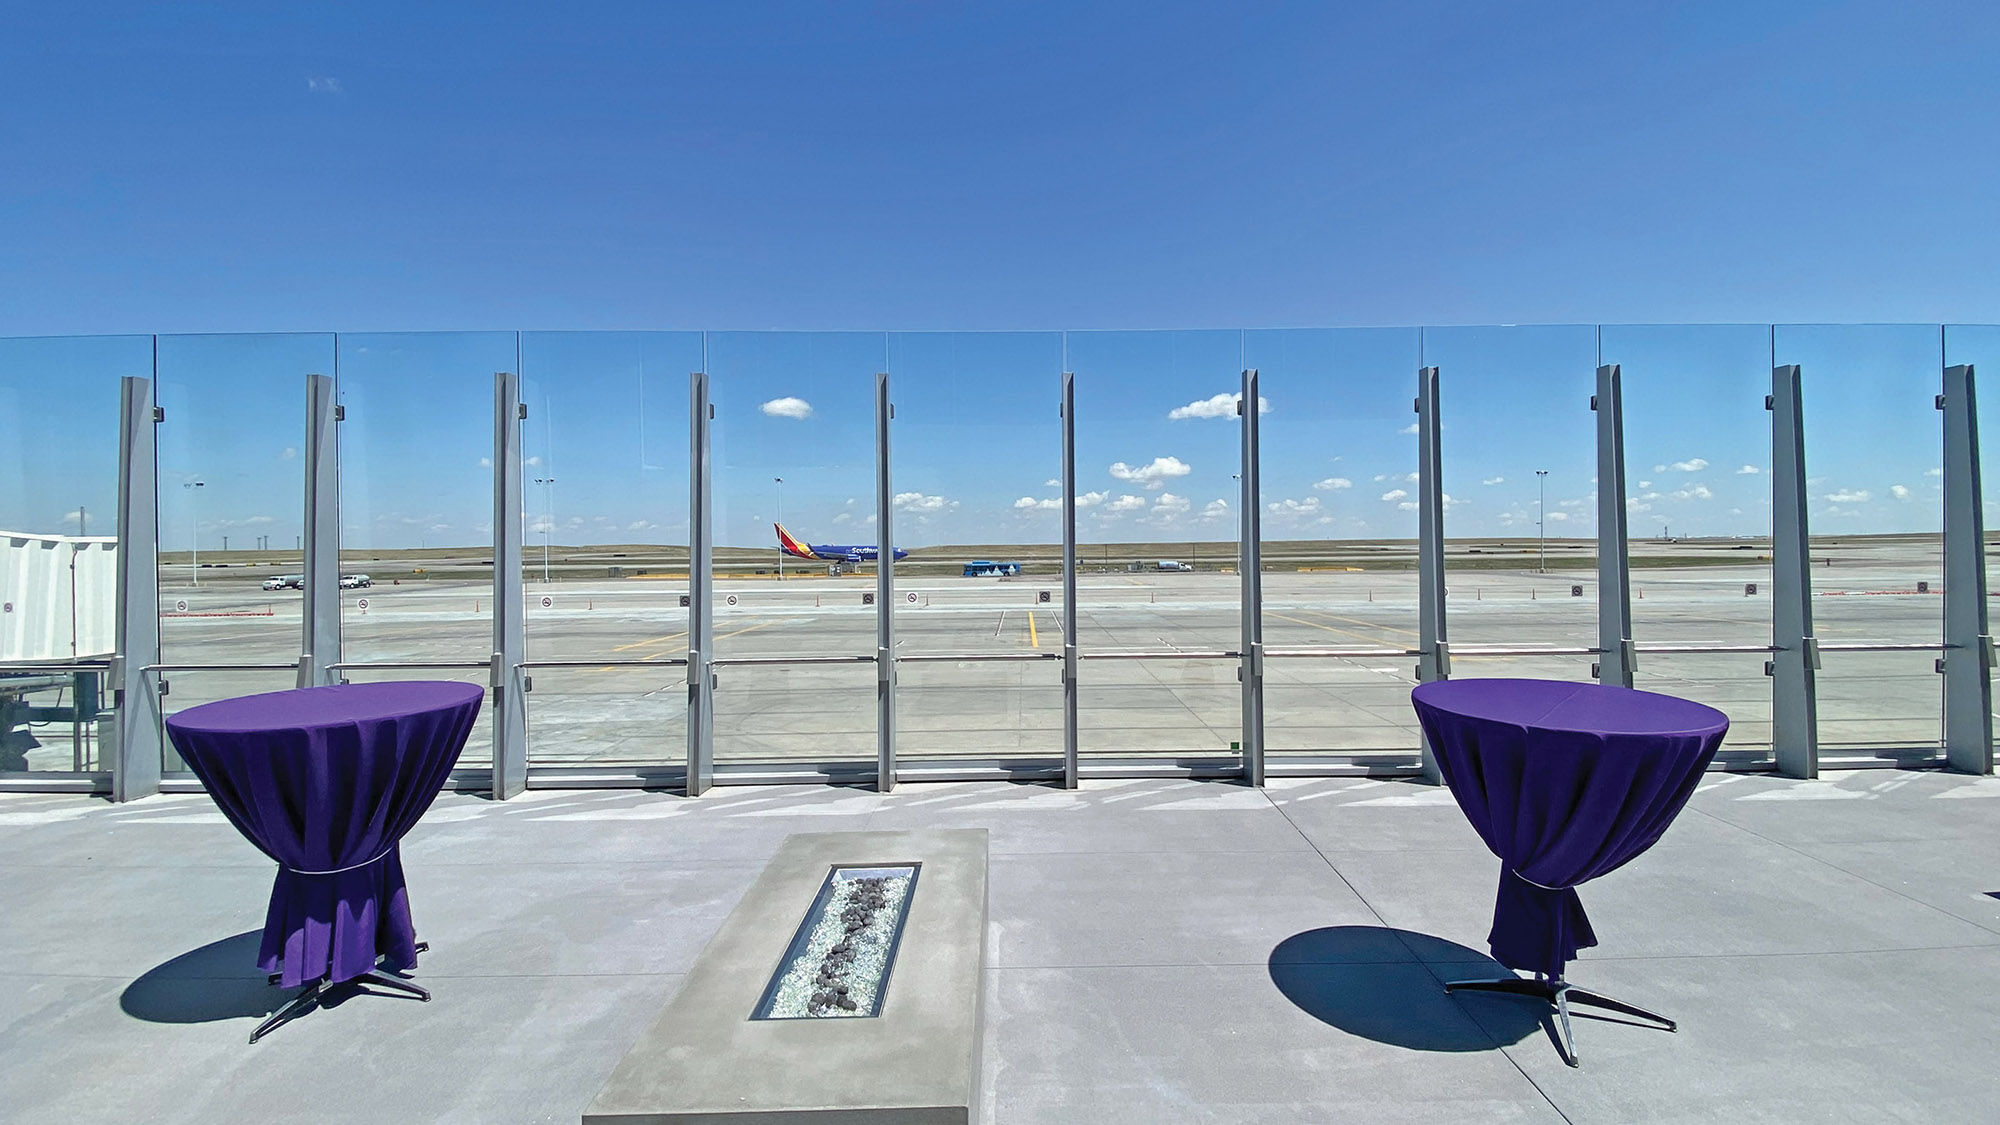 The new gate area offers an outdoor area, complete with firepits and views of the taxiway.